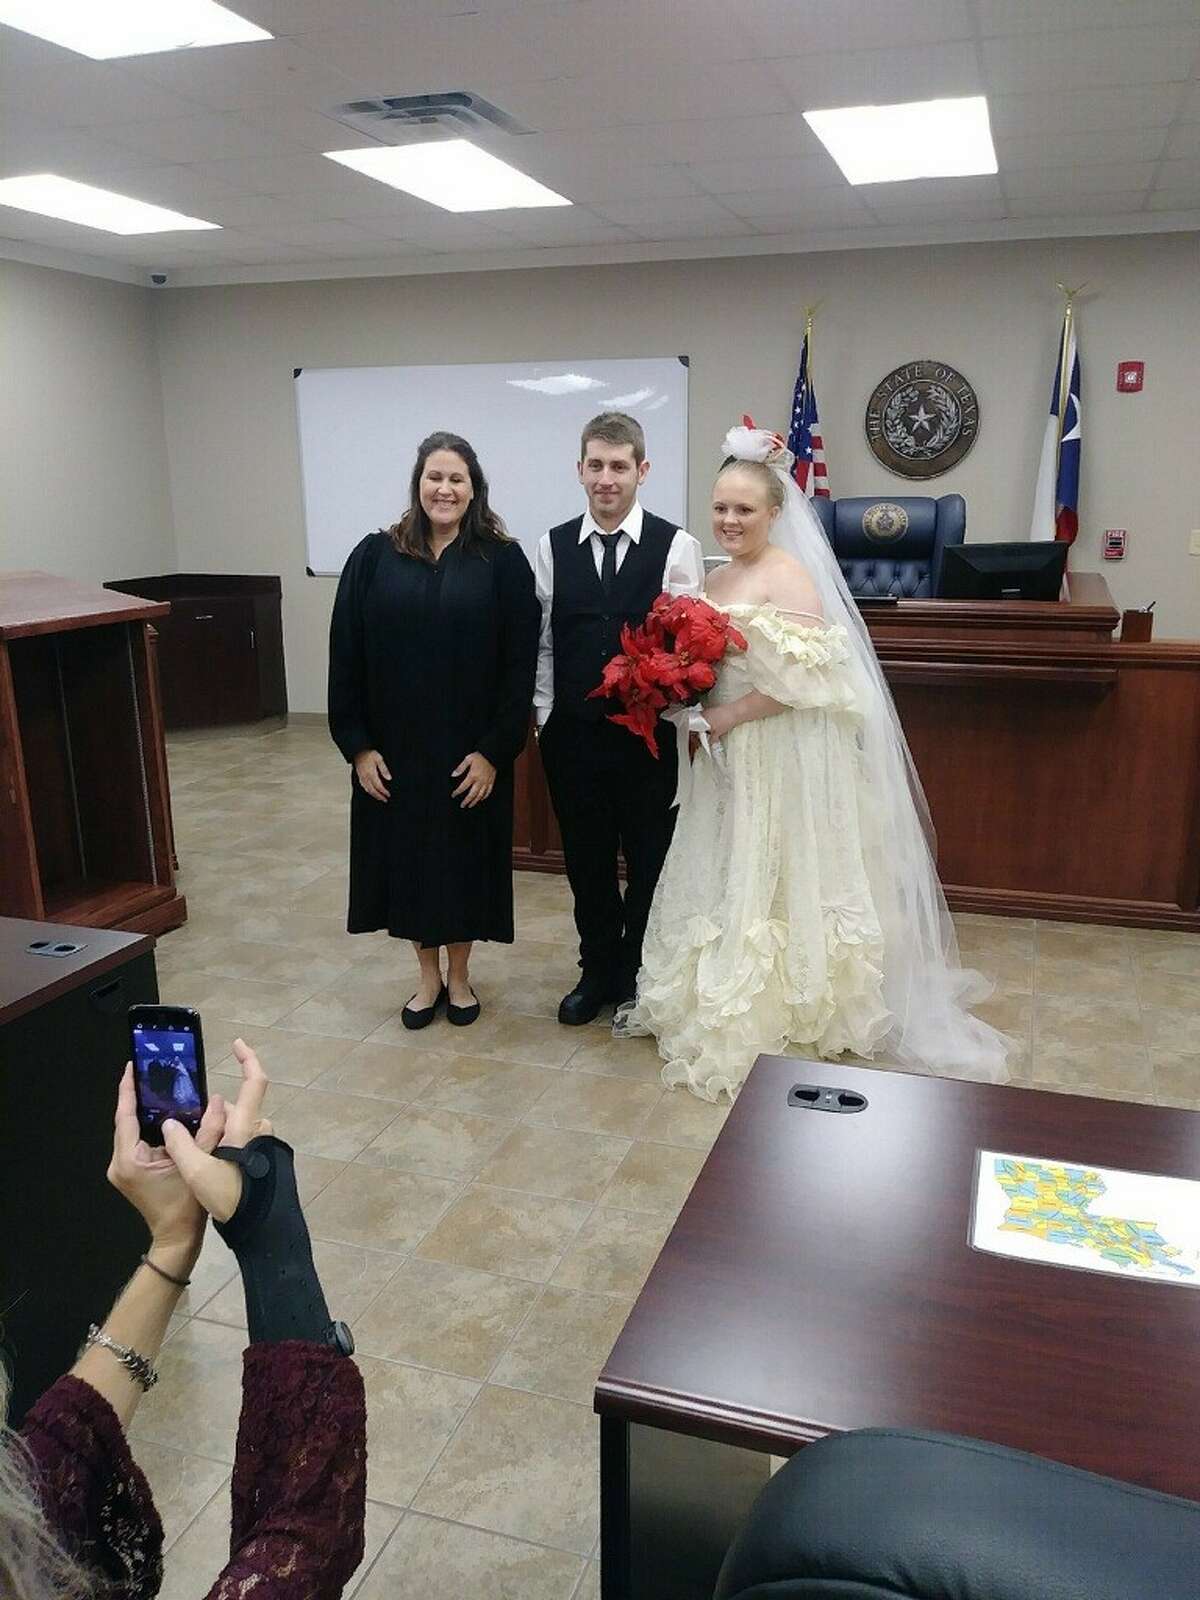 Harley Morgan, 19, and Rhiannon Morgan, 20, were leaving the Justice of the Peace where they had just gotten married Friday afternoon when their vehicle was struck by a Dodge truck, killing the couple instantly. Photos provided by Christina Fontenot, Harley Morgan's sister